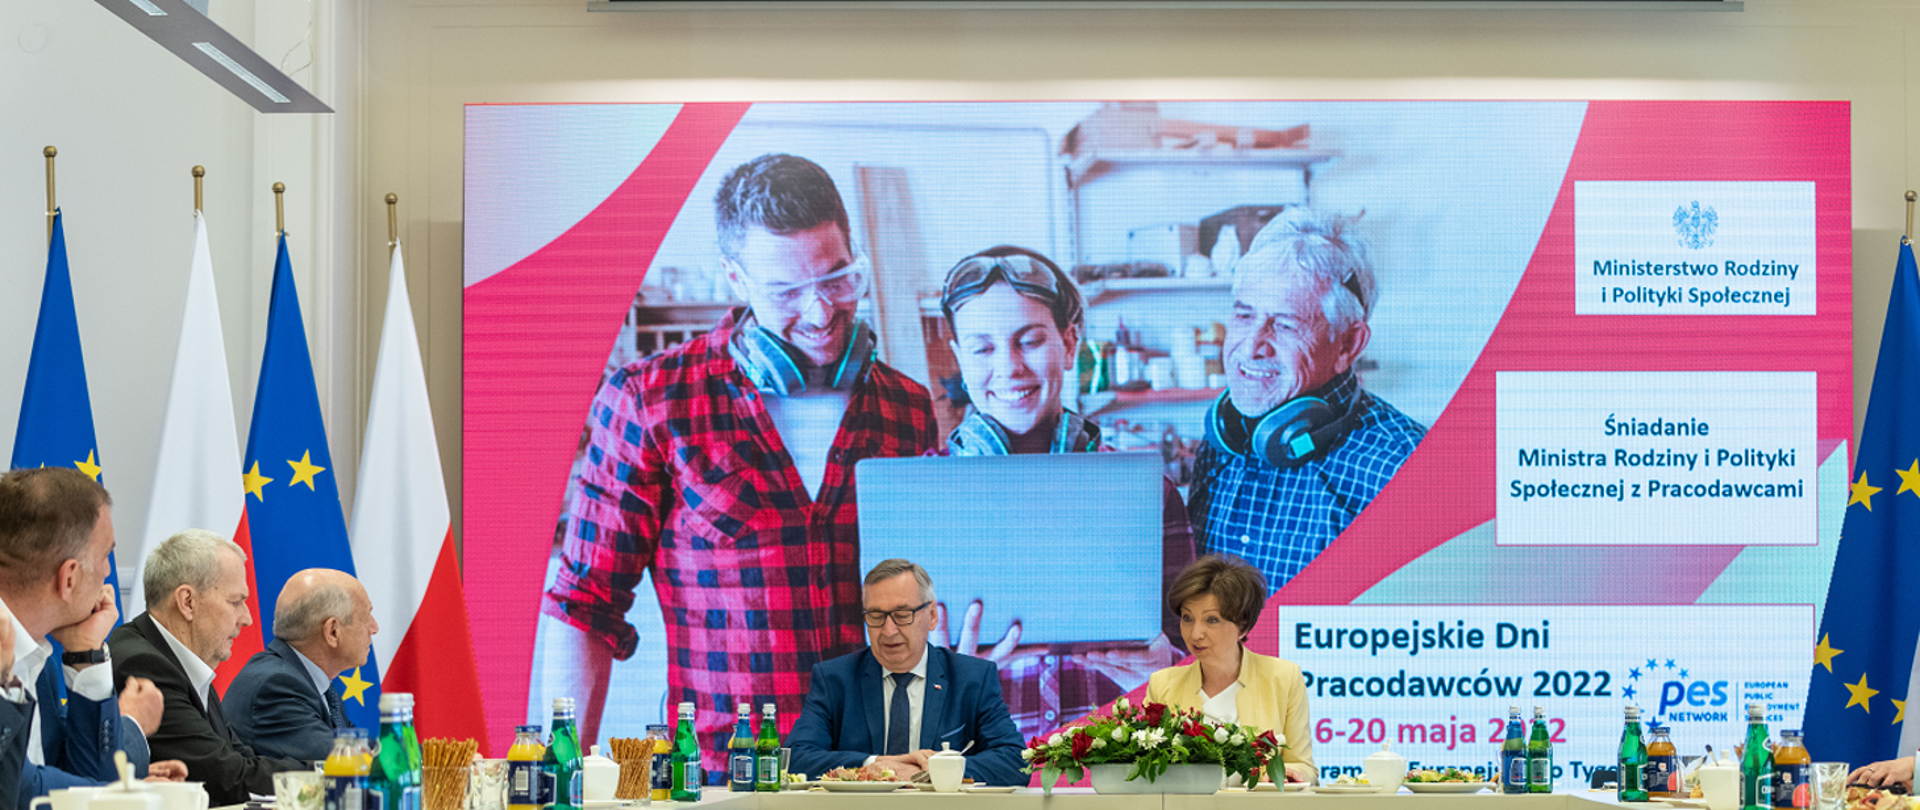 Meeting of Minister Maląg with employers on the occasion of the European Employers Days